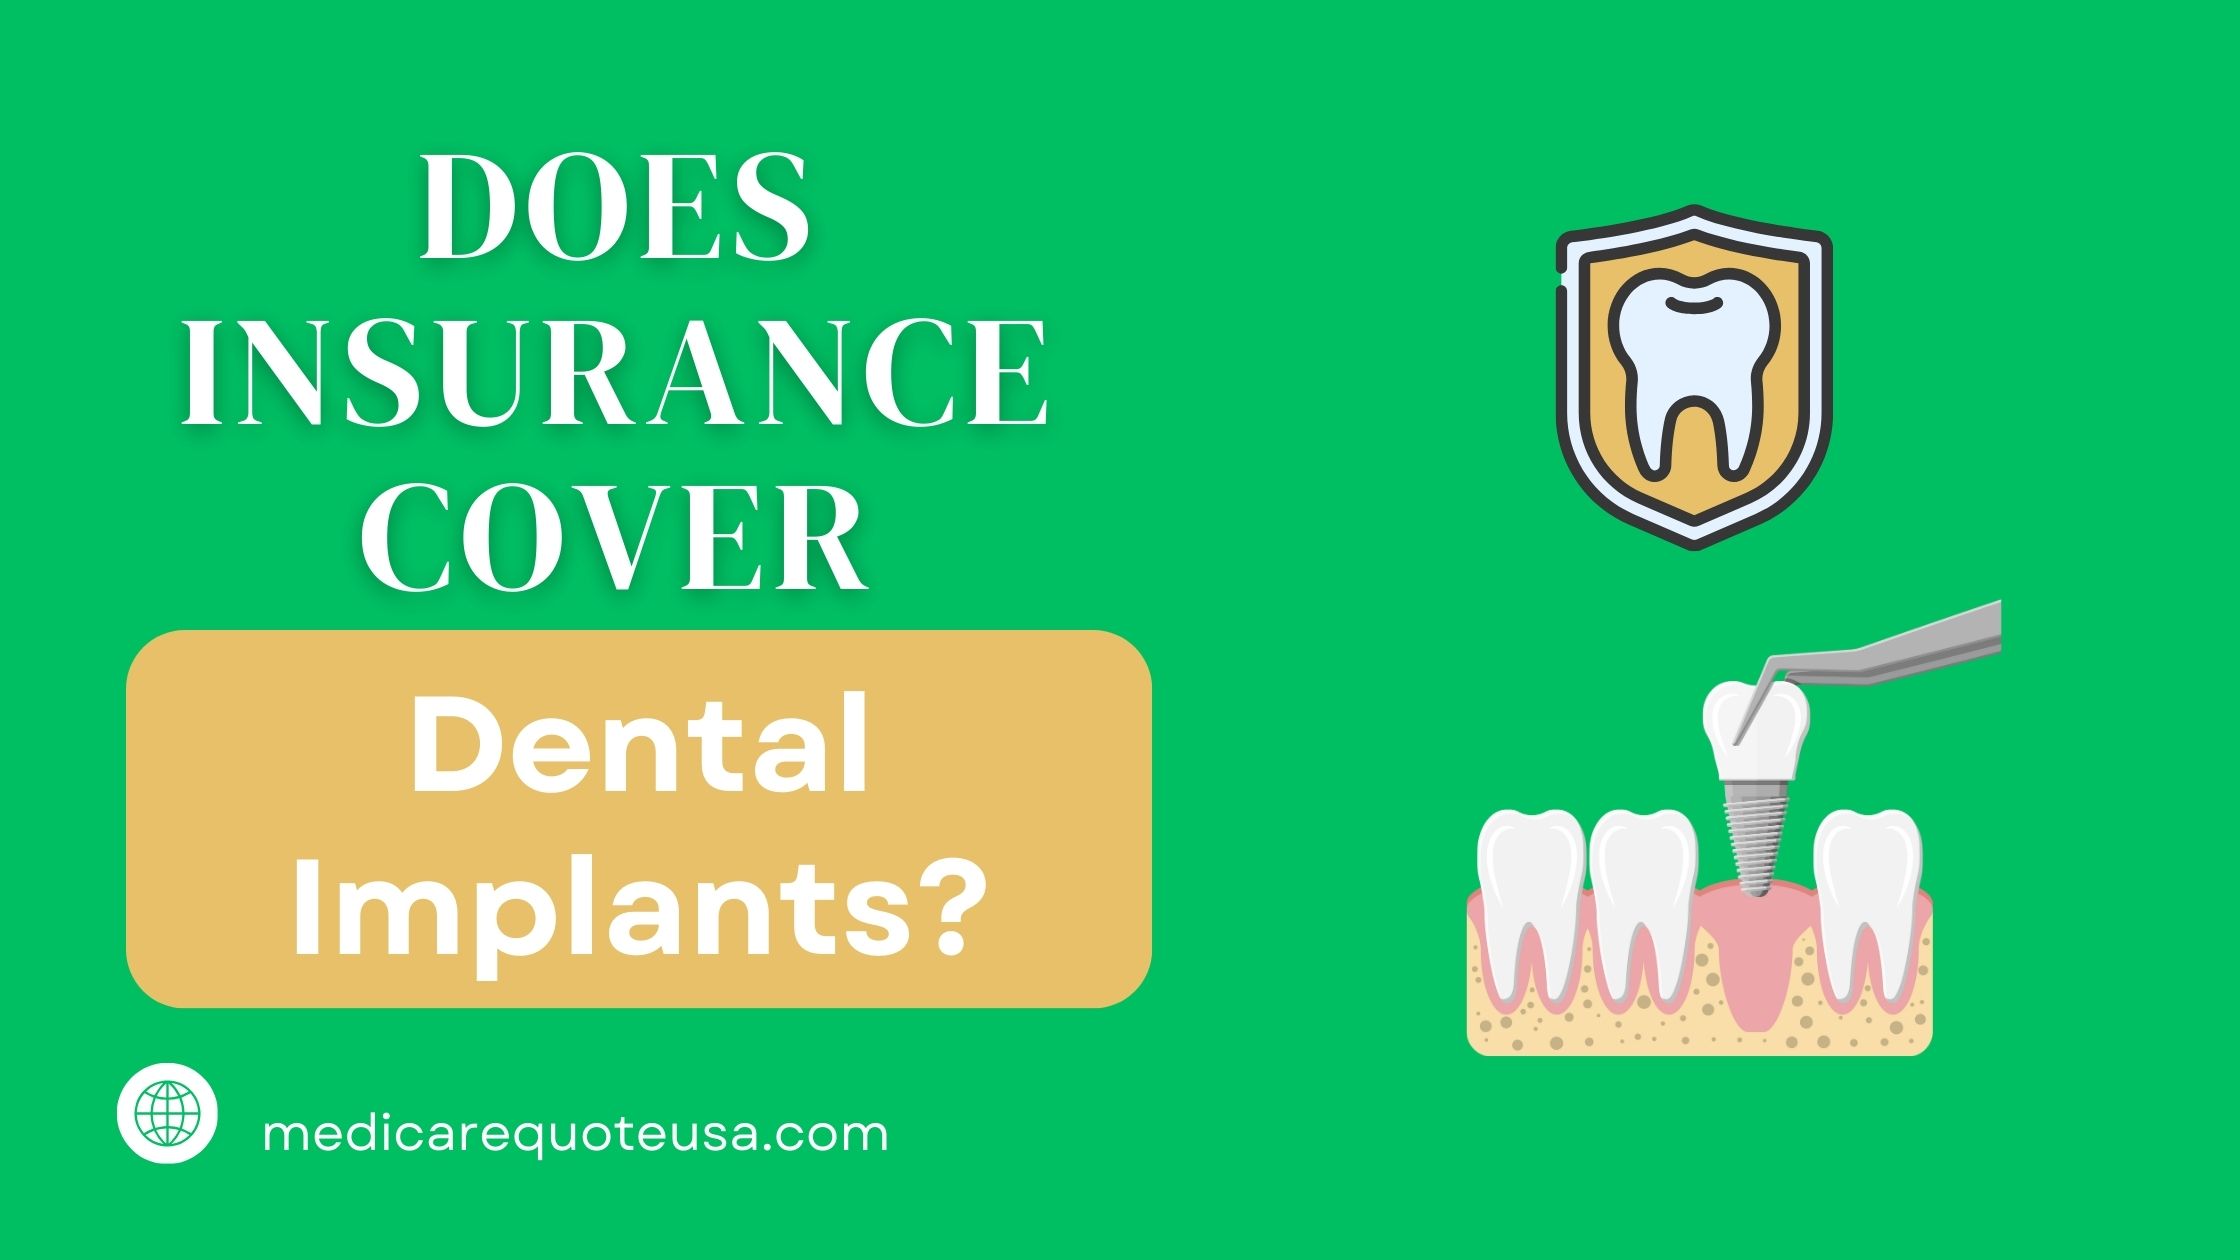 Does Insurance Cover Dental Implants In USA